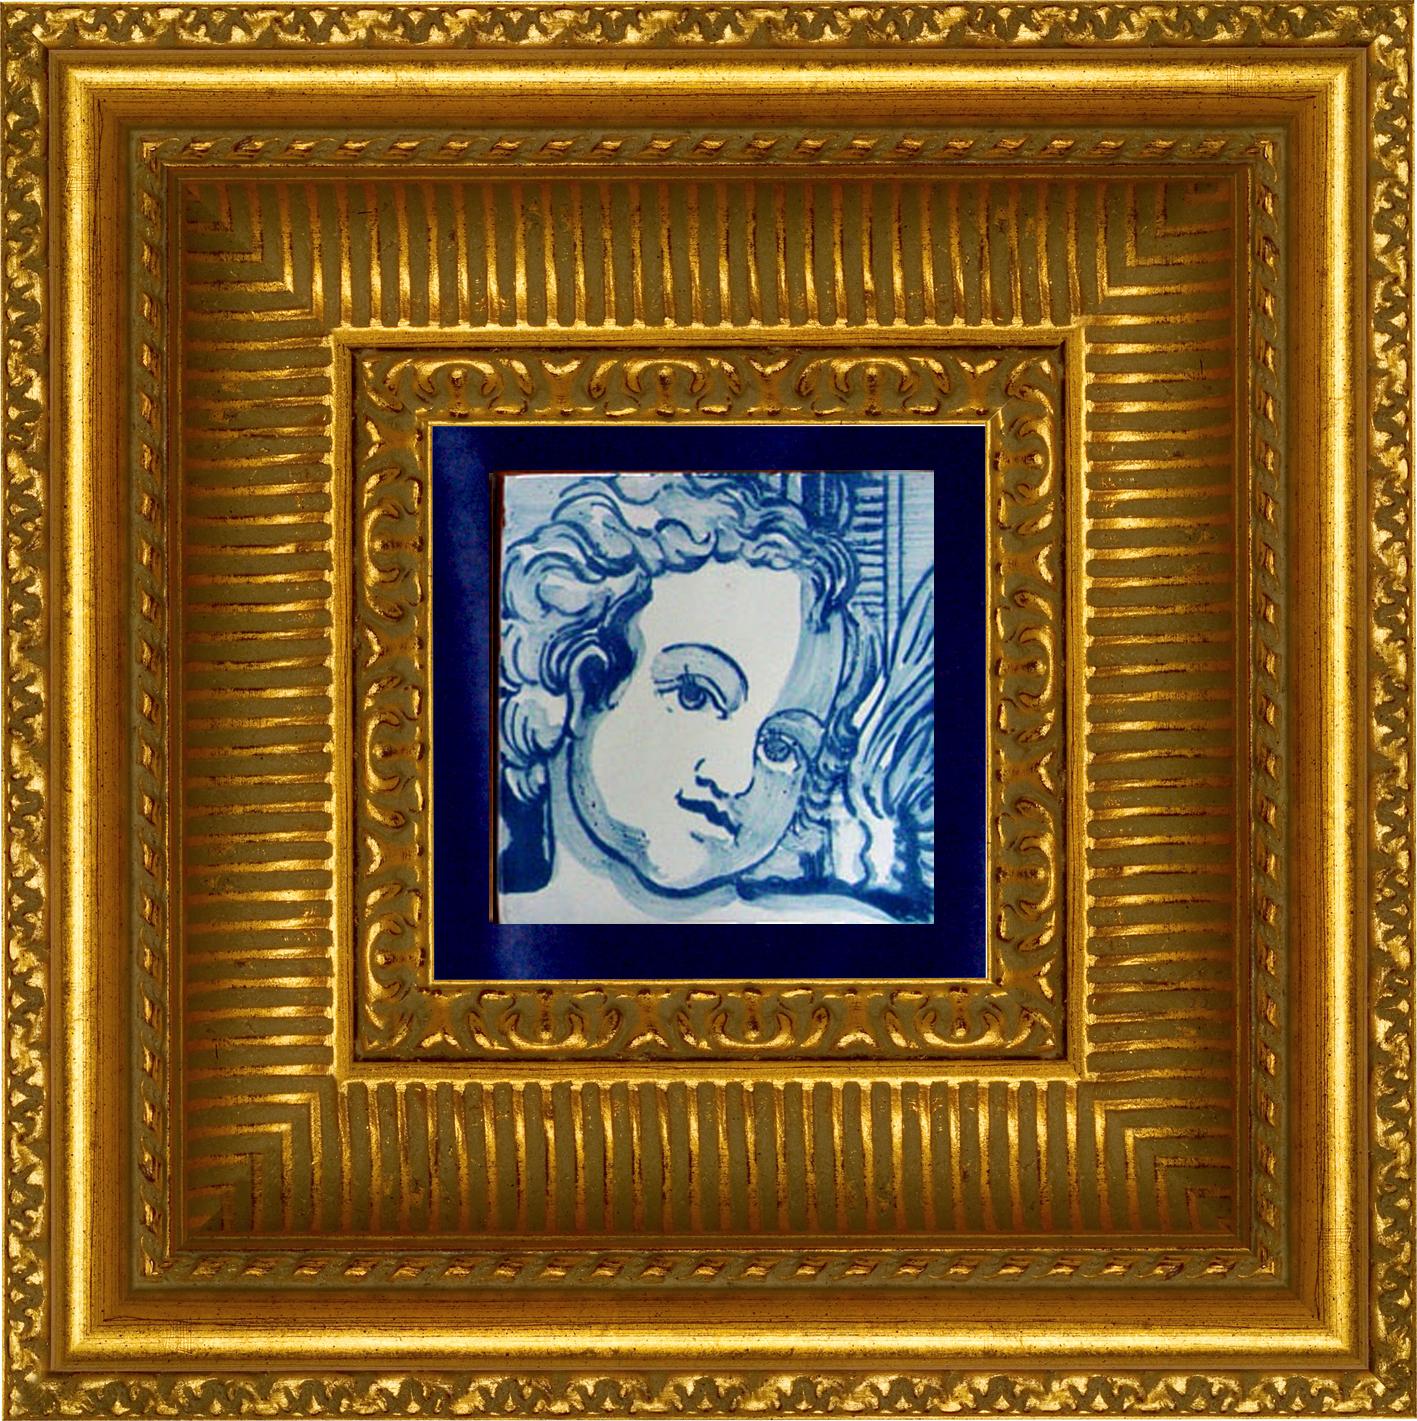 Gorgeous blue hand painted Baroque cherub or angel 18th century style Portuguese ceramic tile or azulejo
This tile painted in blue over white in typical 18th century Portugal set the taste for monumental ceramic tile applications in churches and